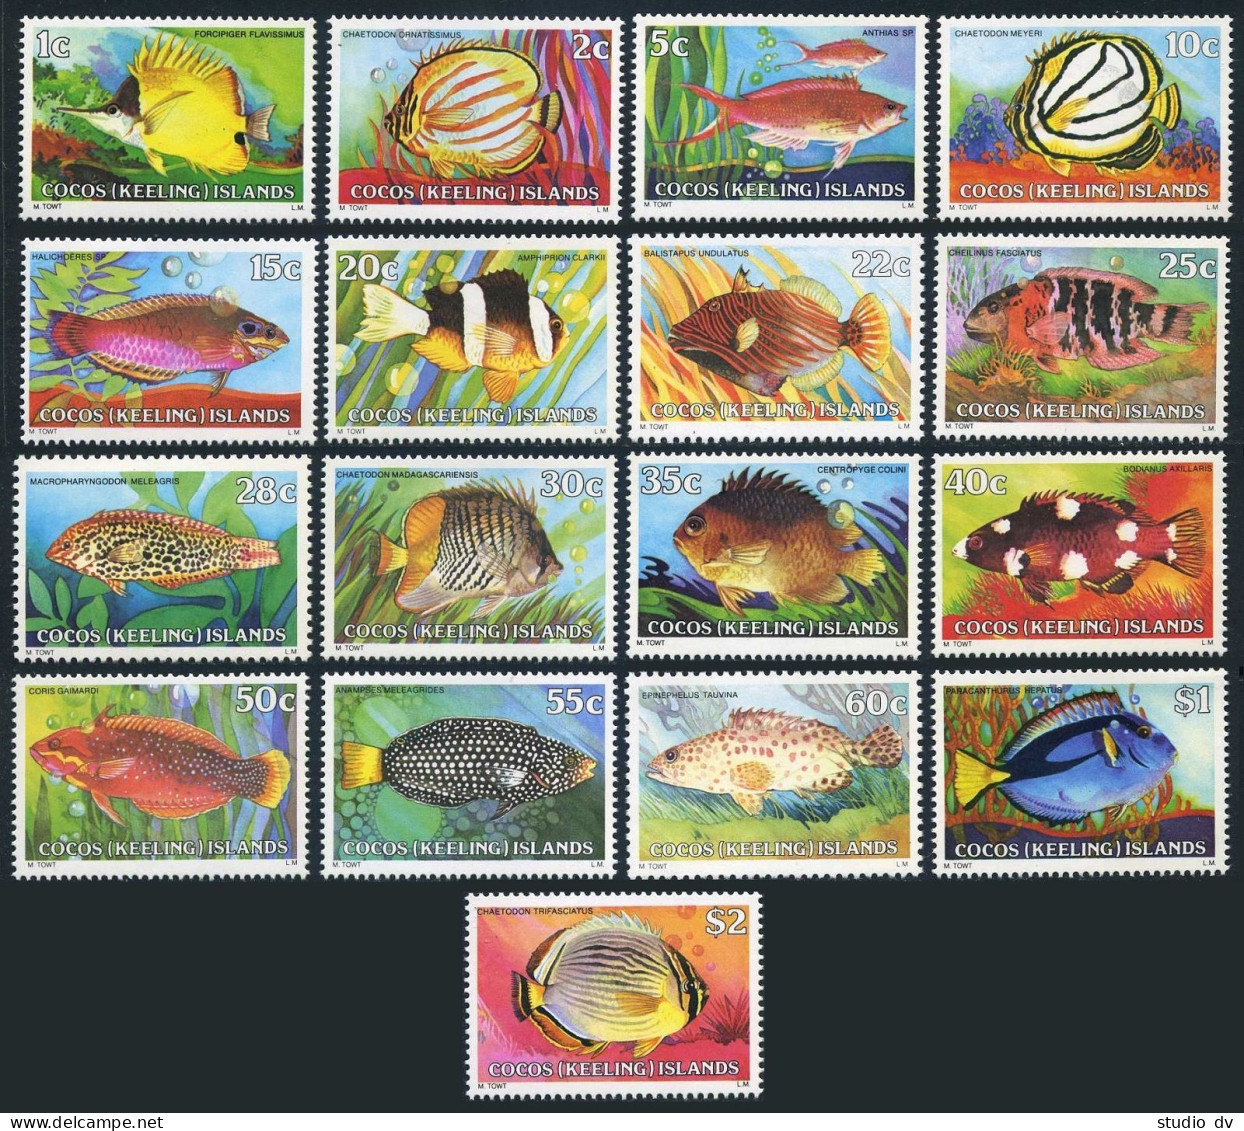 Cocos Islands 34-50 Gutter Pairs, MNH. Mi 34-47, 50-52. Tropical Fish 1979-1980. - Cocos (Keeling) Islands